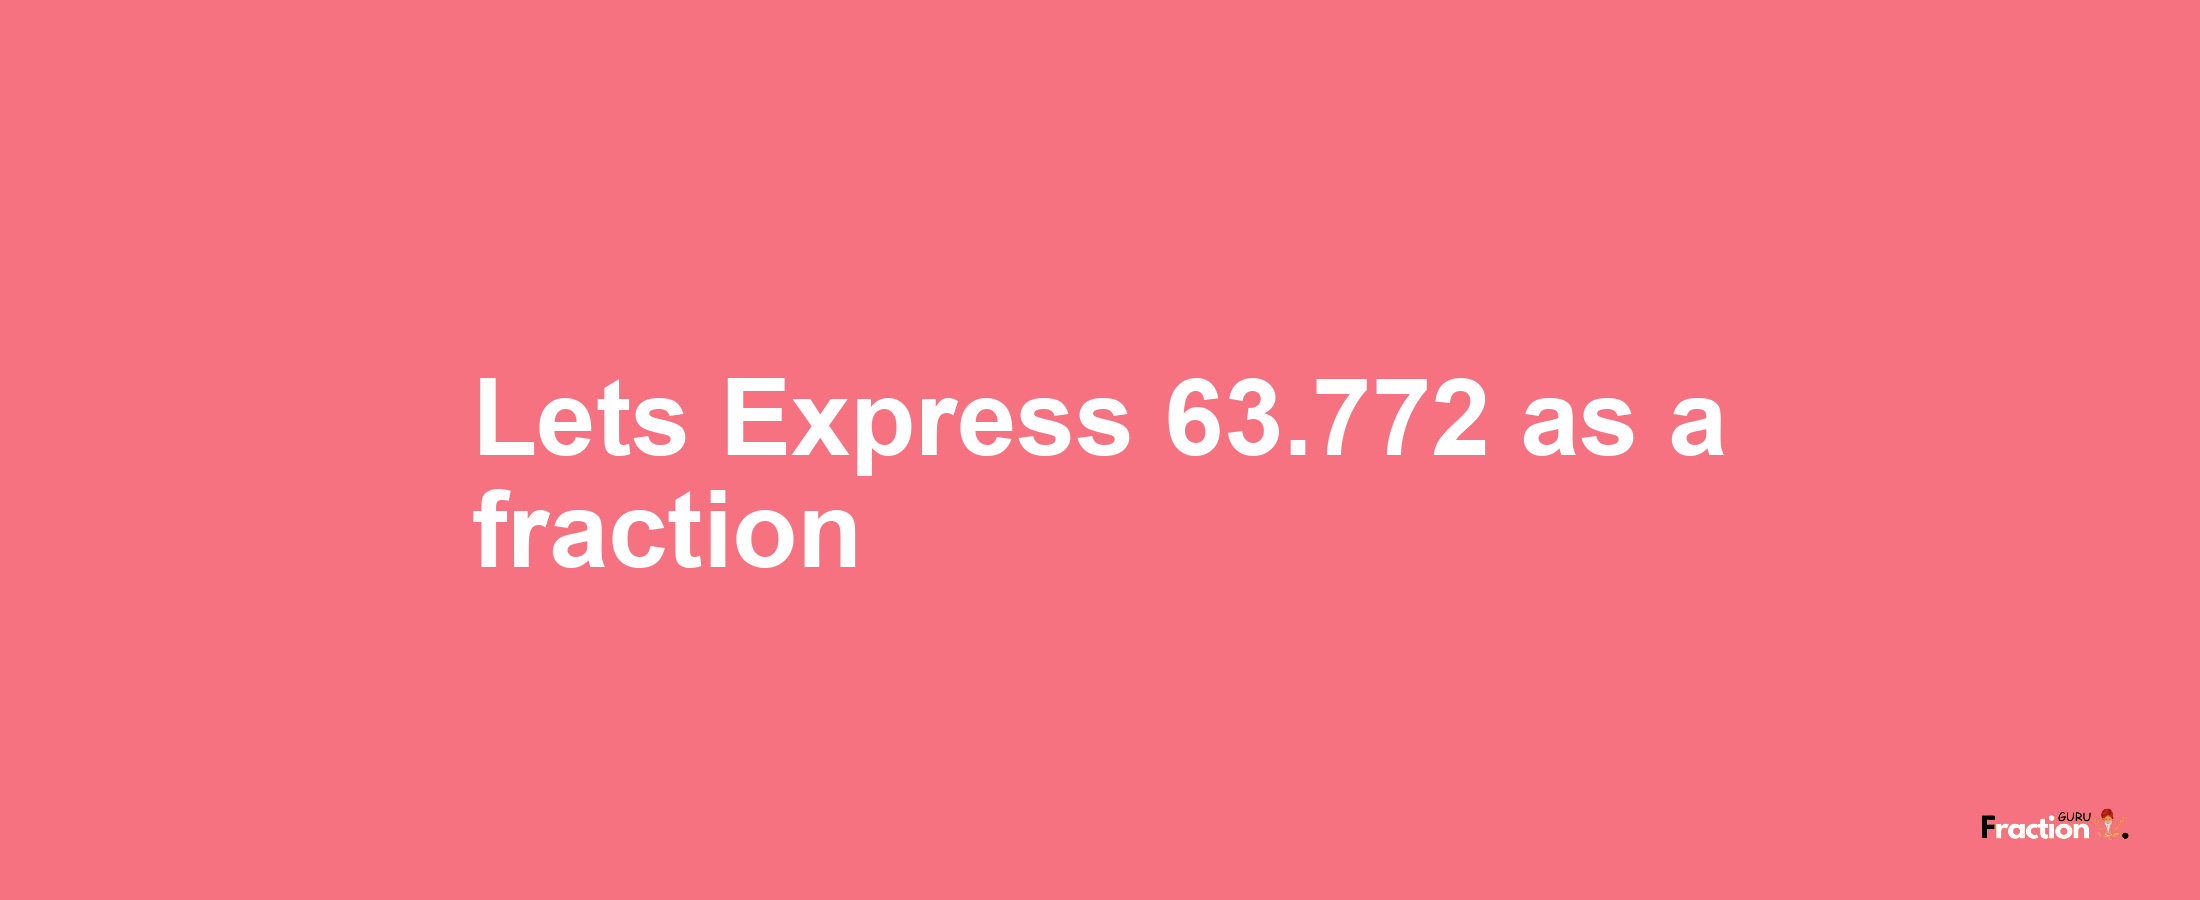 Lets Express 63.772 as afraction